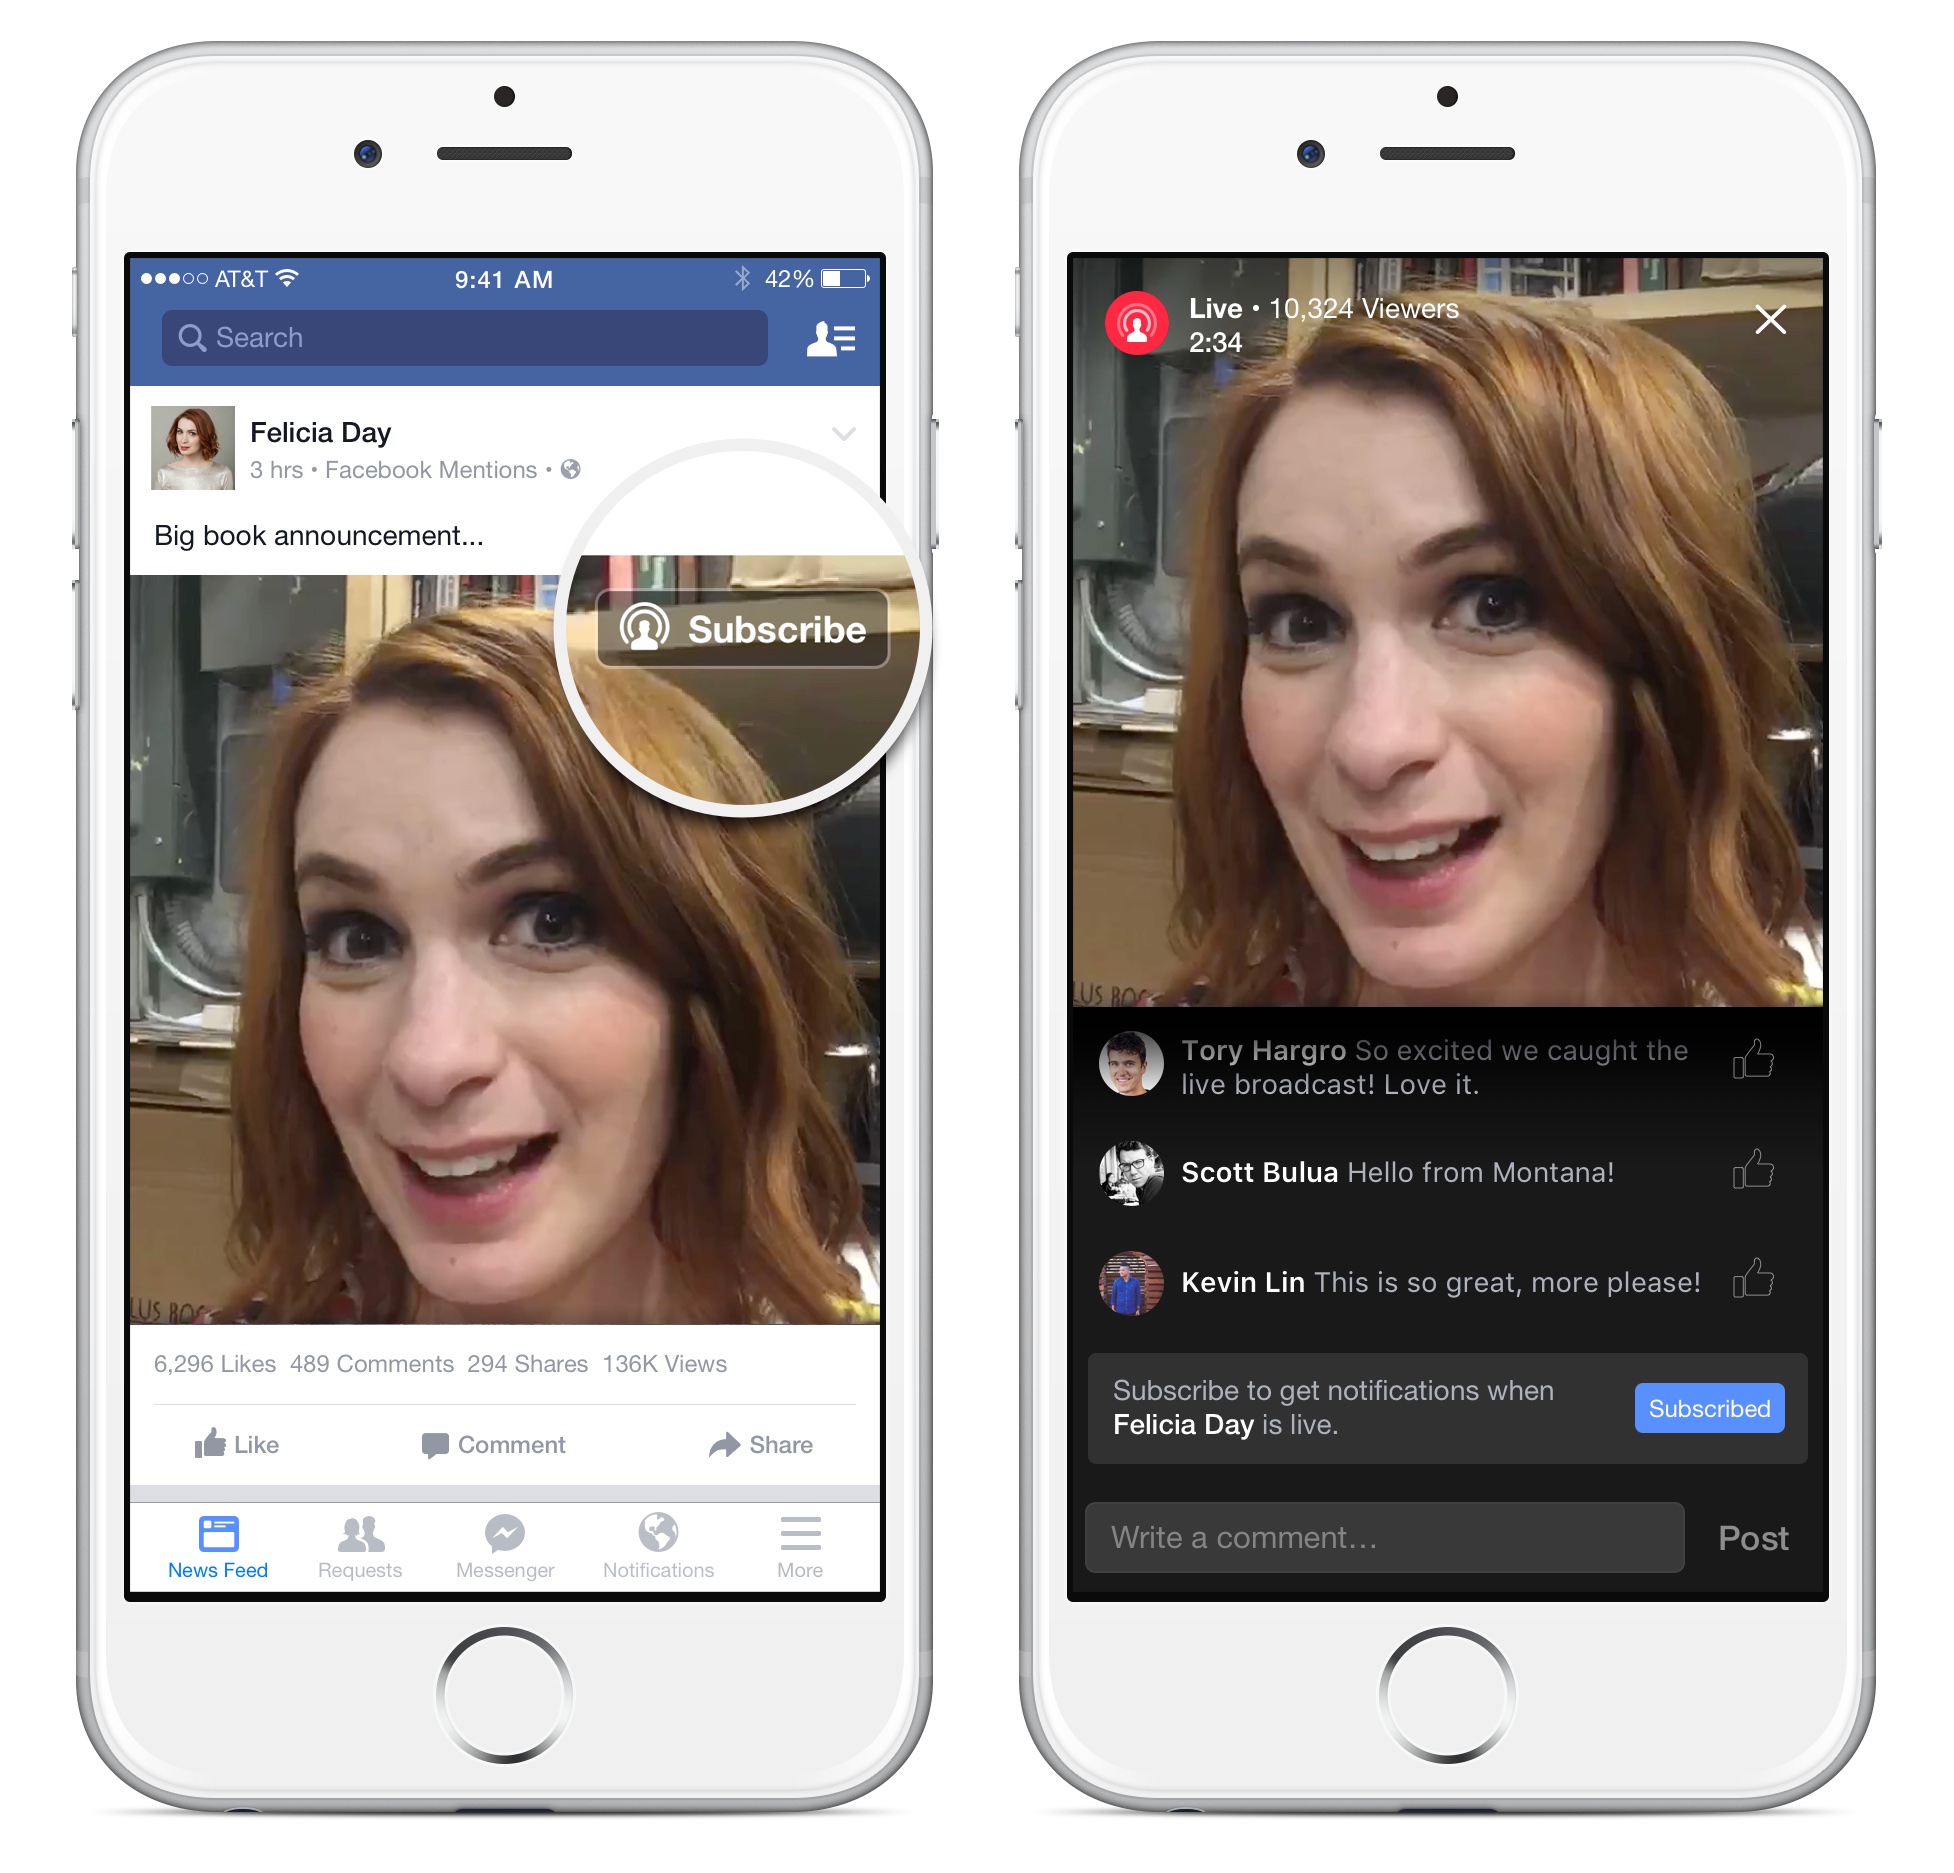 Facebook brings photo collages to iPhone app, starts testing Periscope